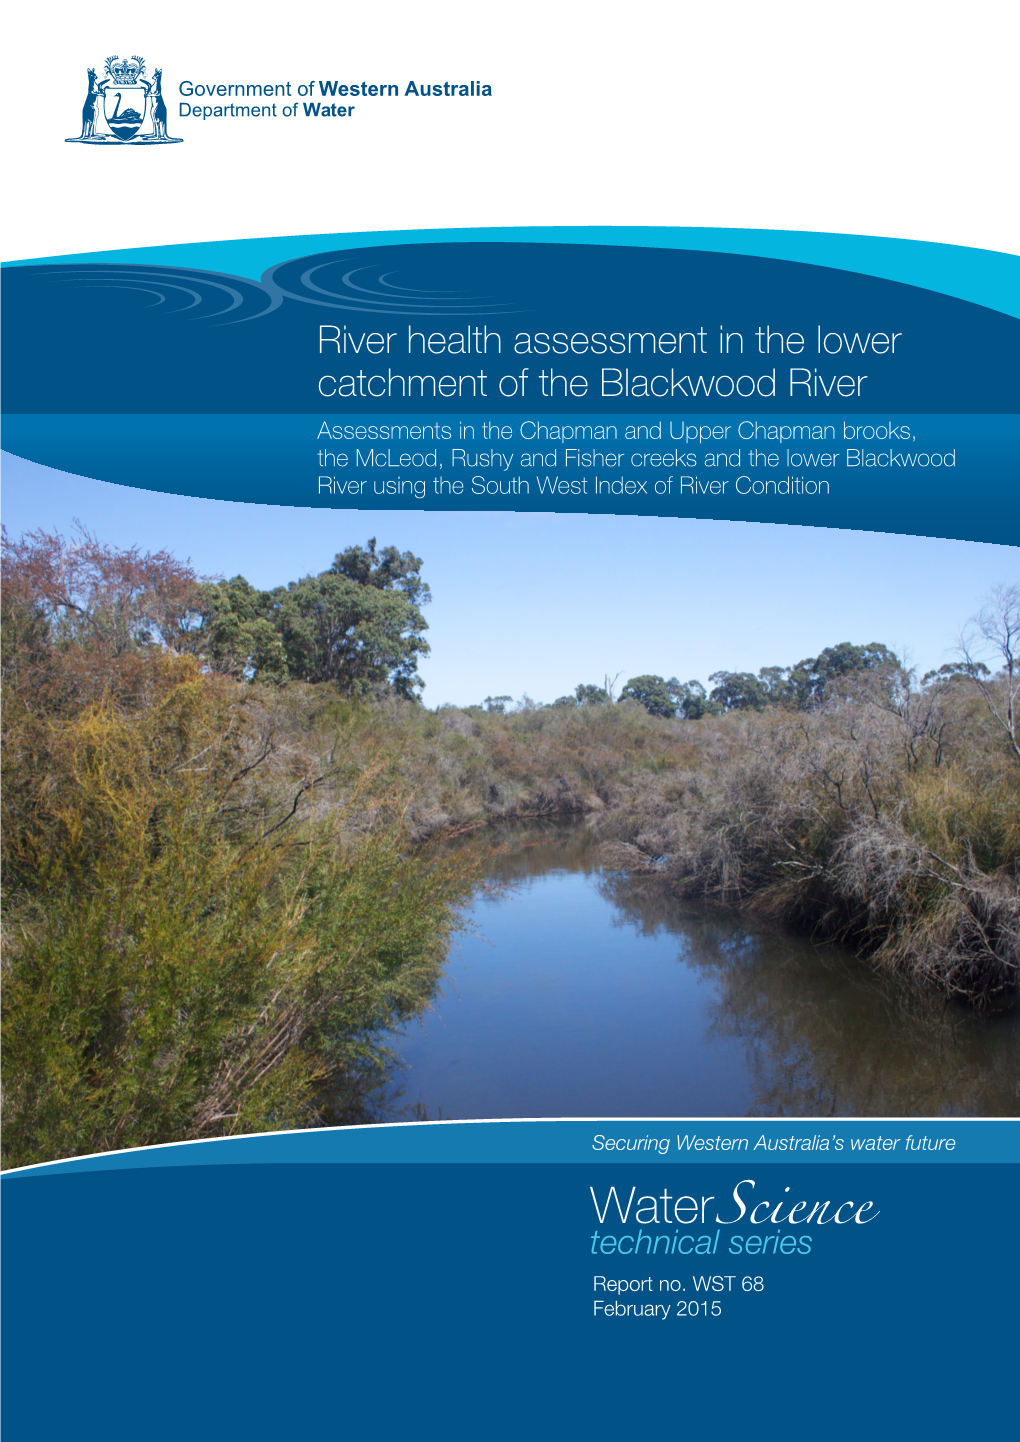 River Health Assessment in the Lower Catchment of the Blackwood River